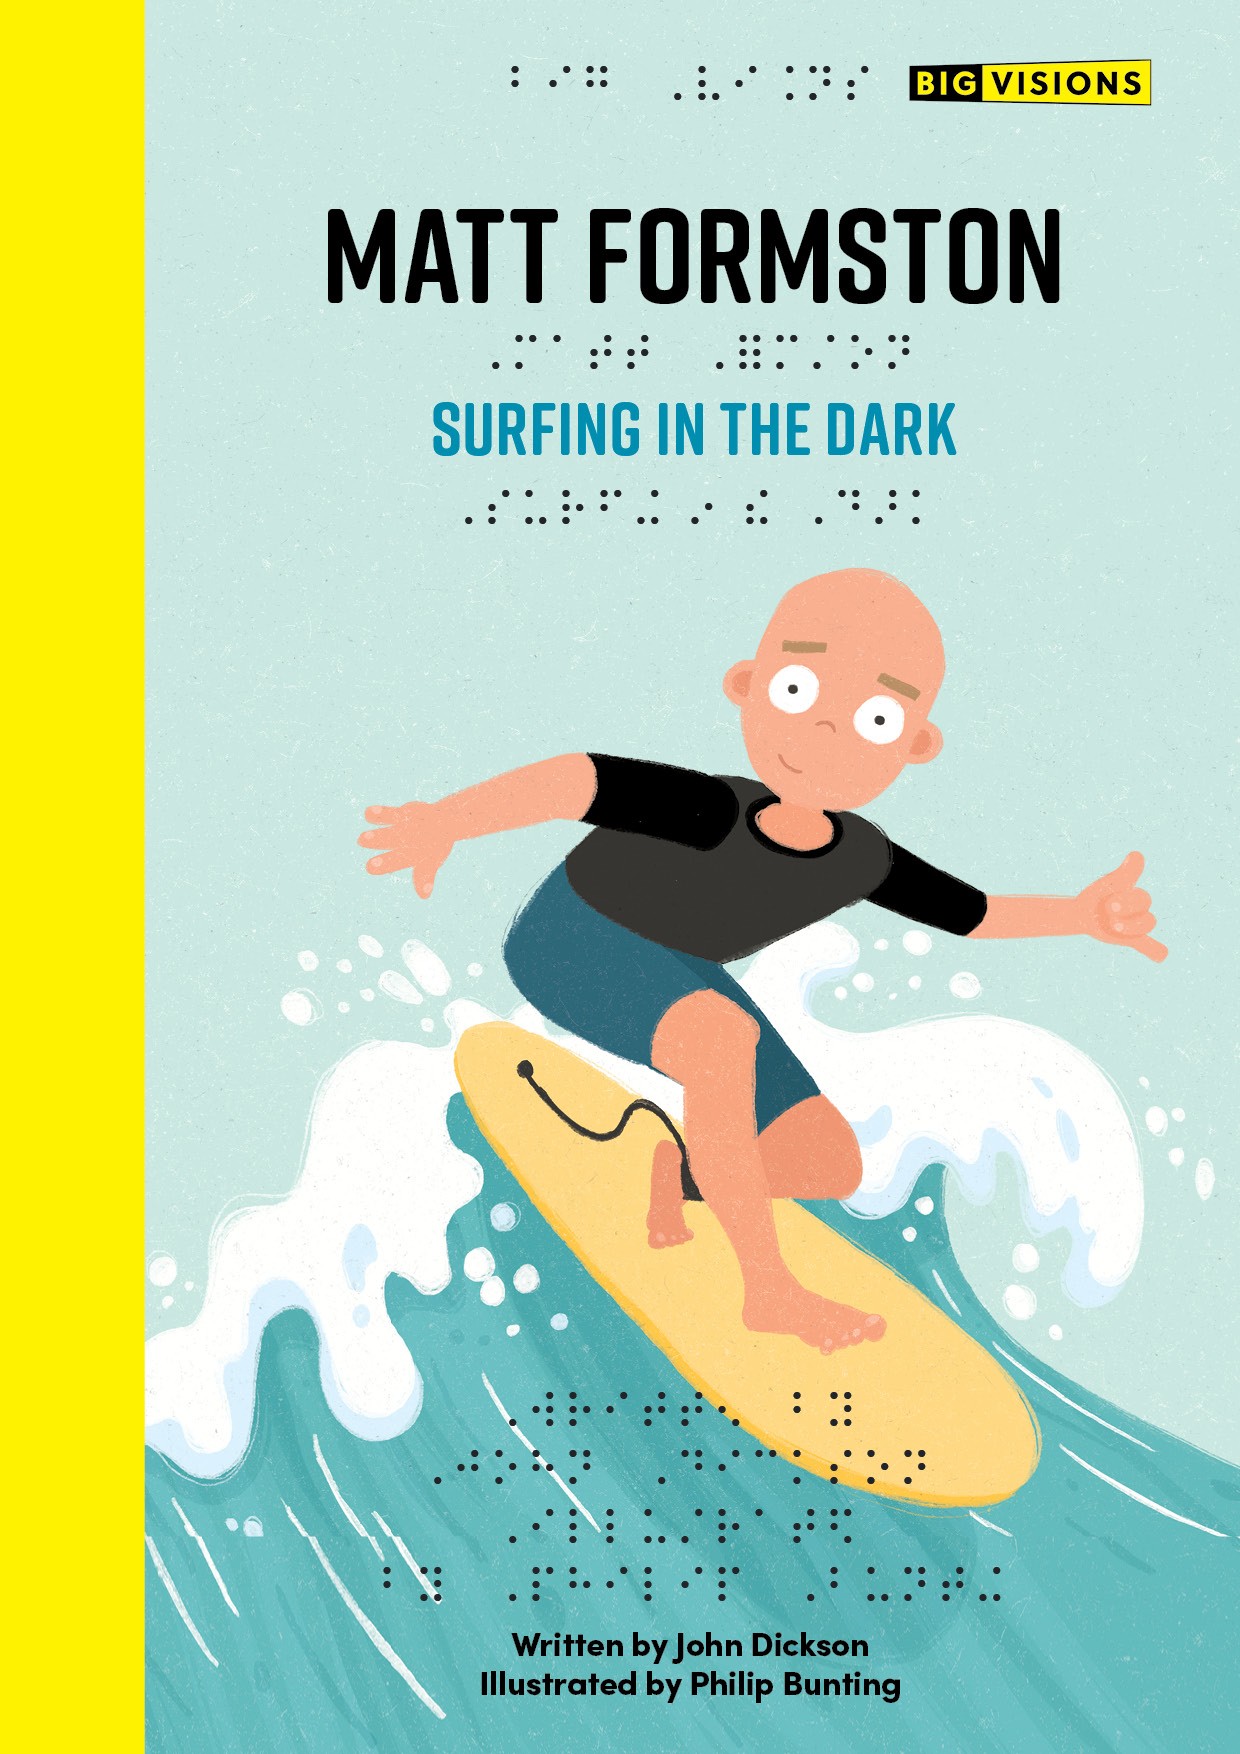 A book cover with a cartoon man surfing